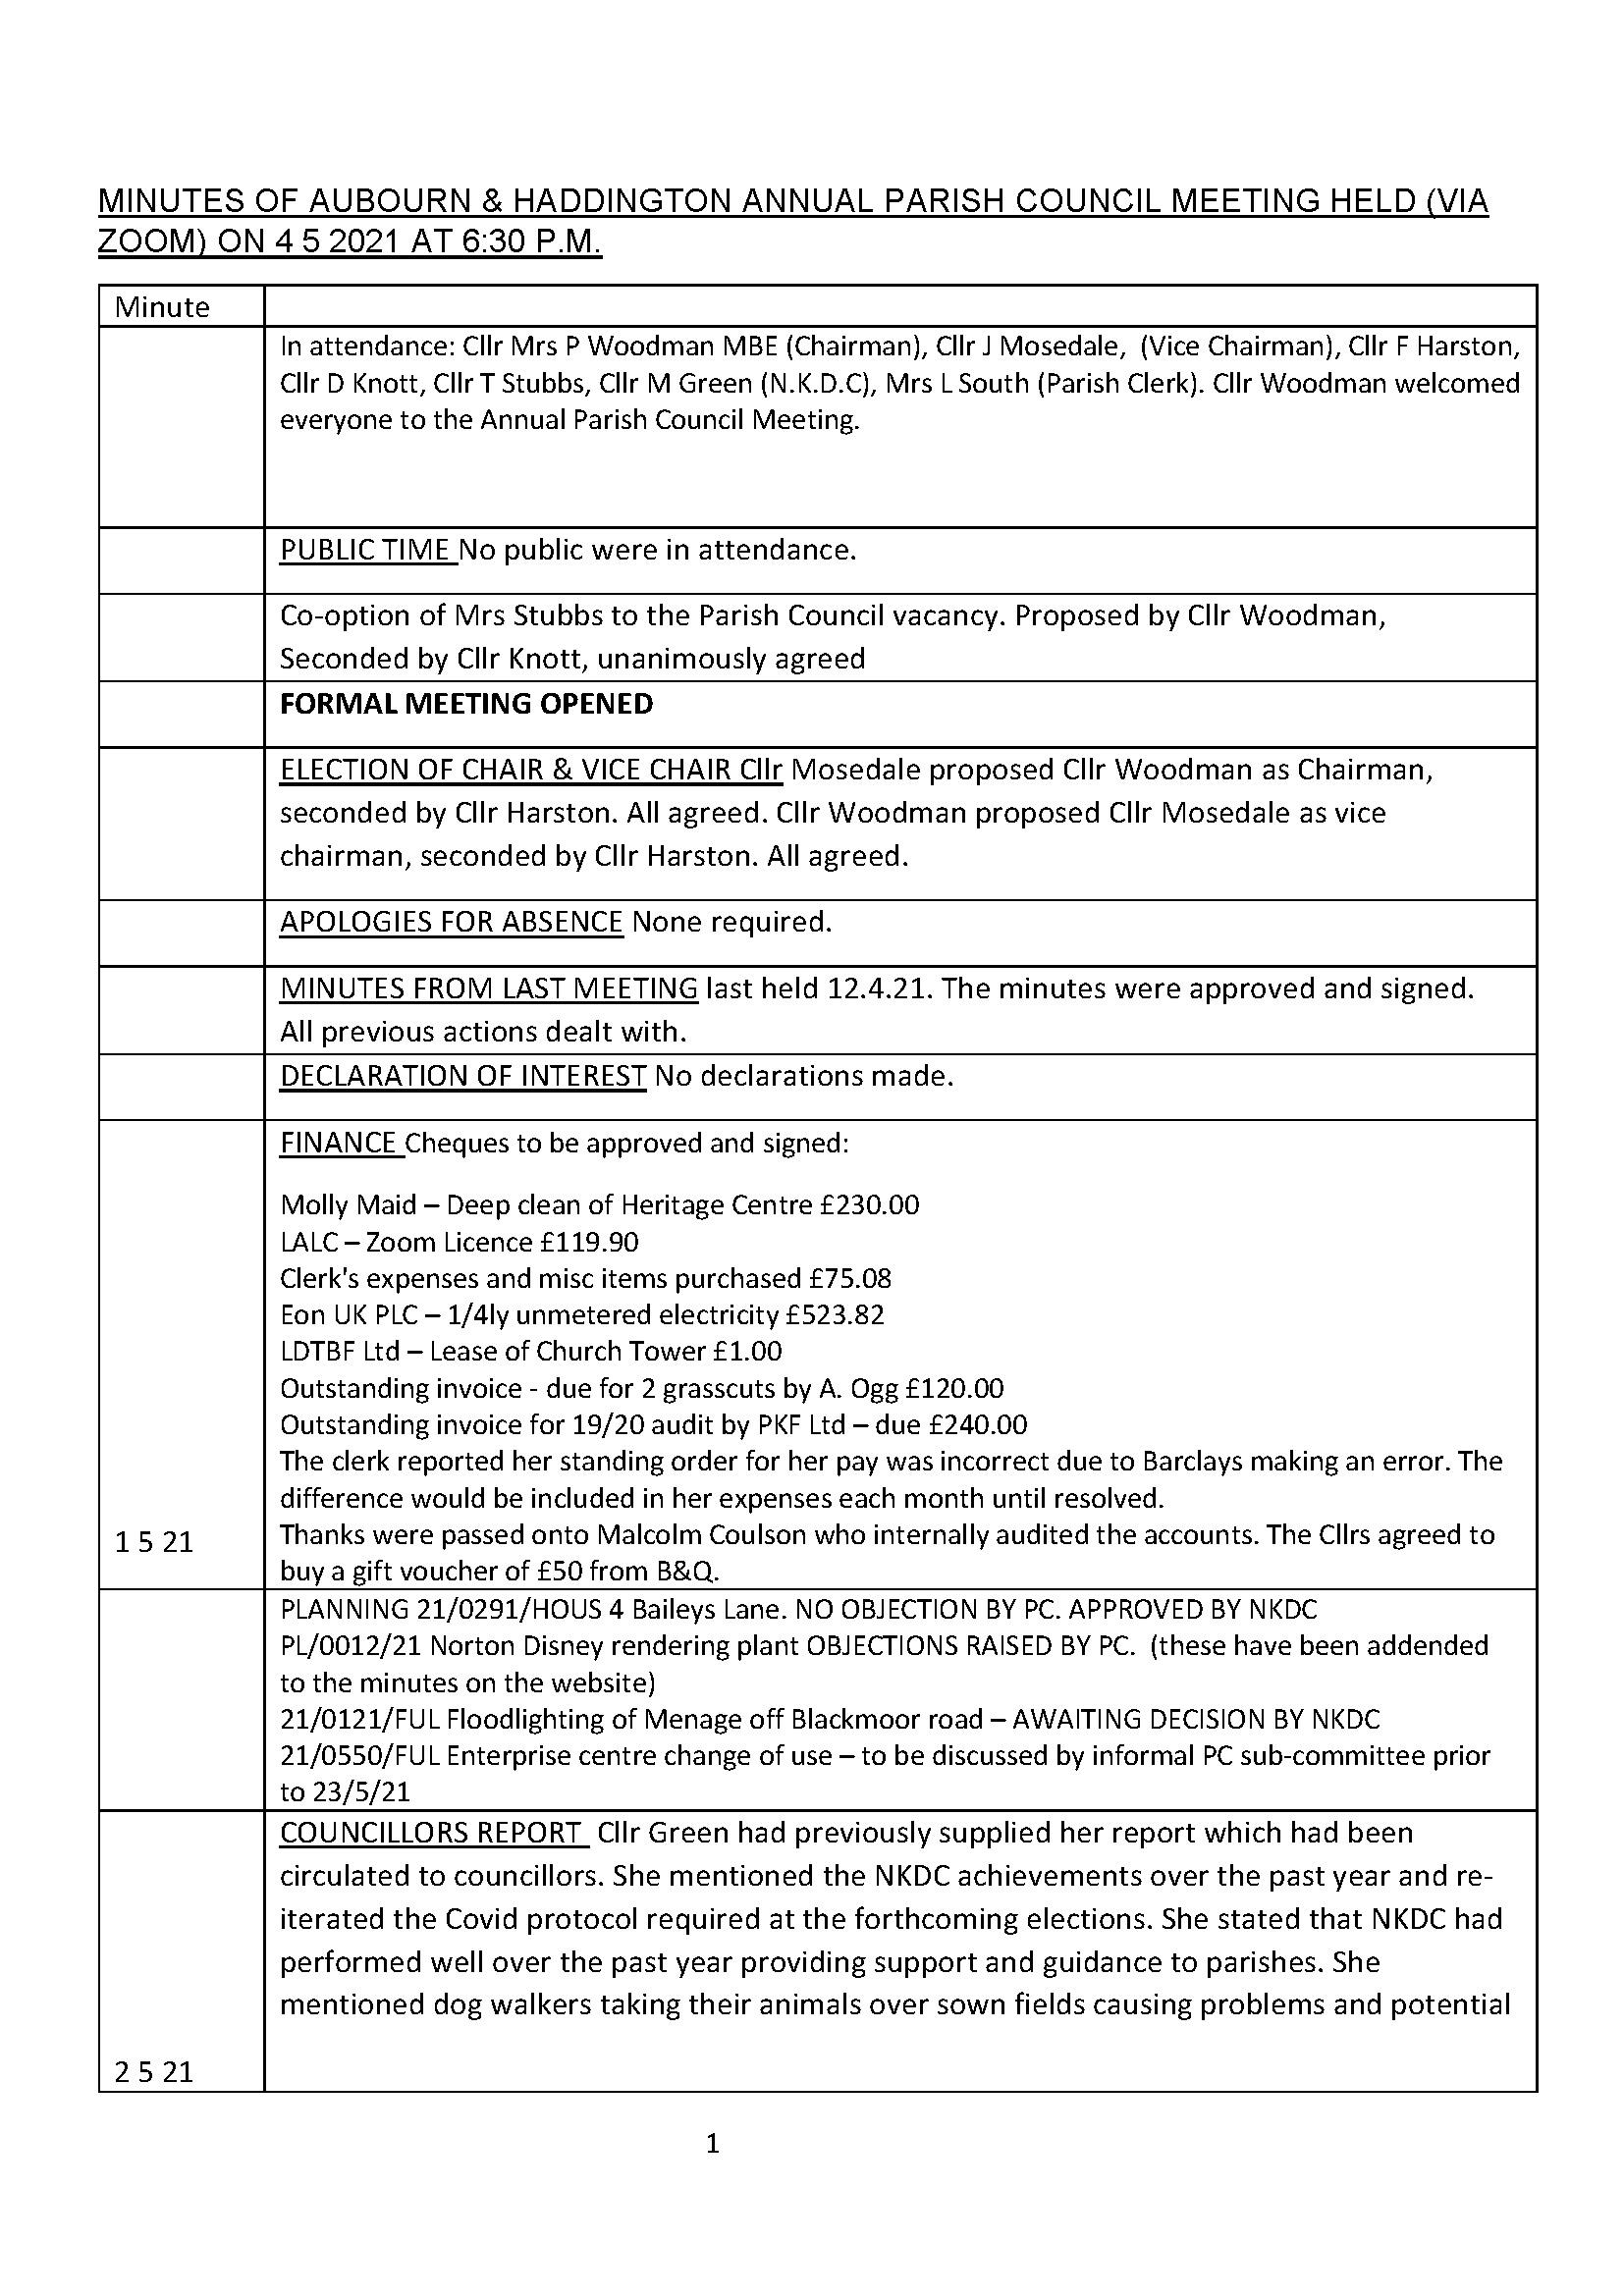 Annual parish council meeting minutes 4 5 21 final version page 1